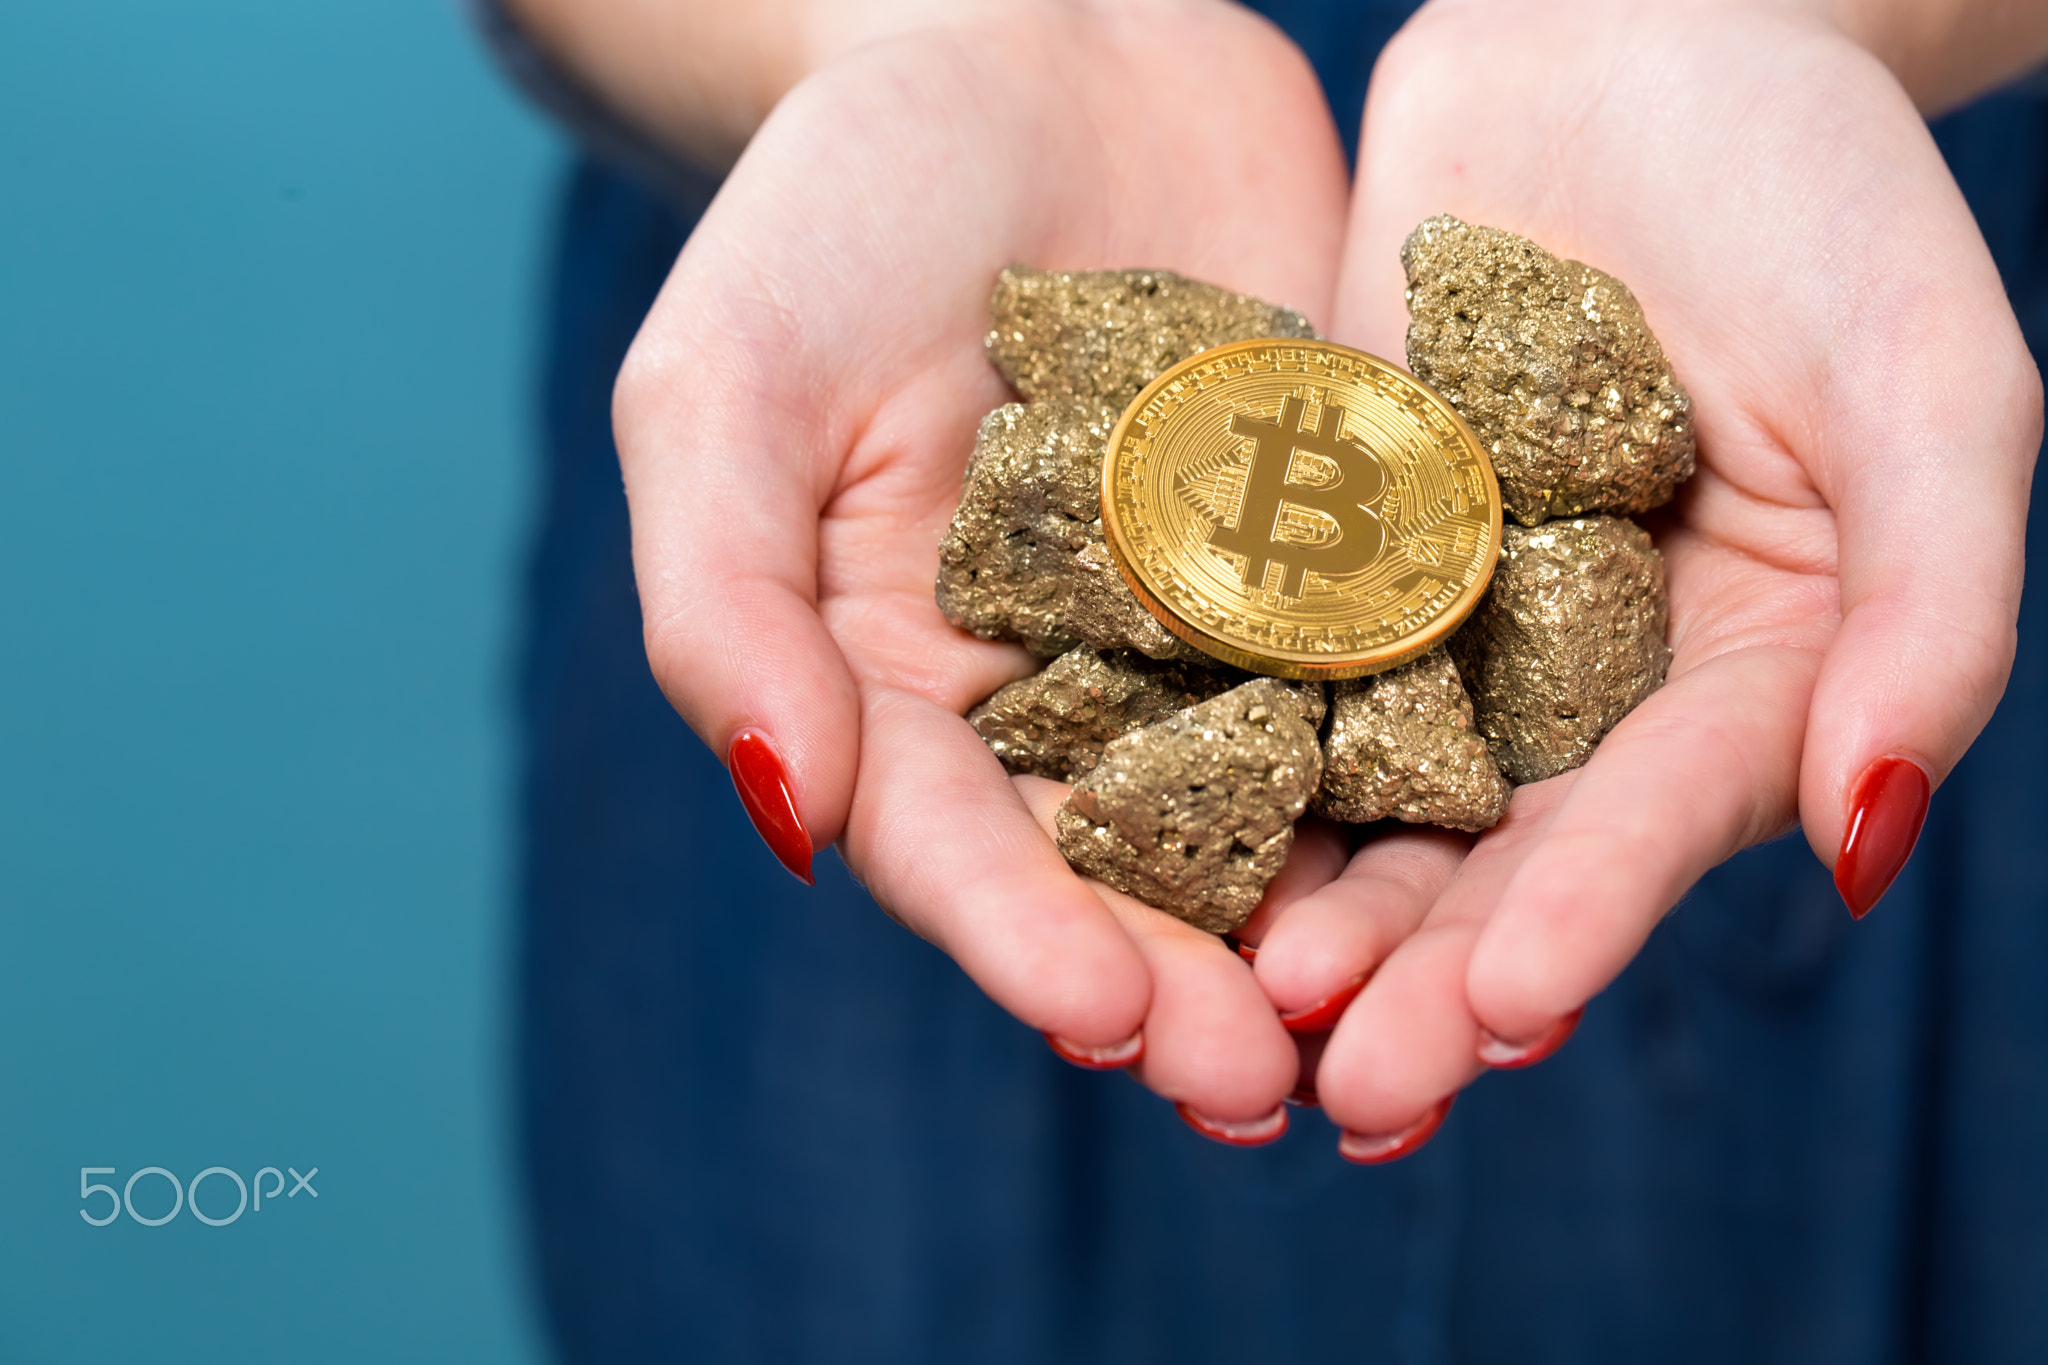 Woman holding a physical bitcoin cryptocurrency